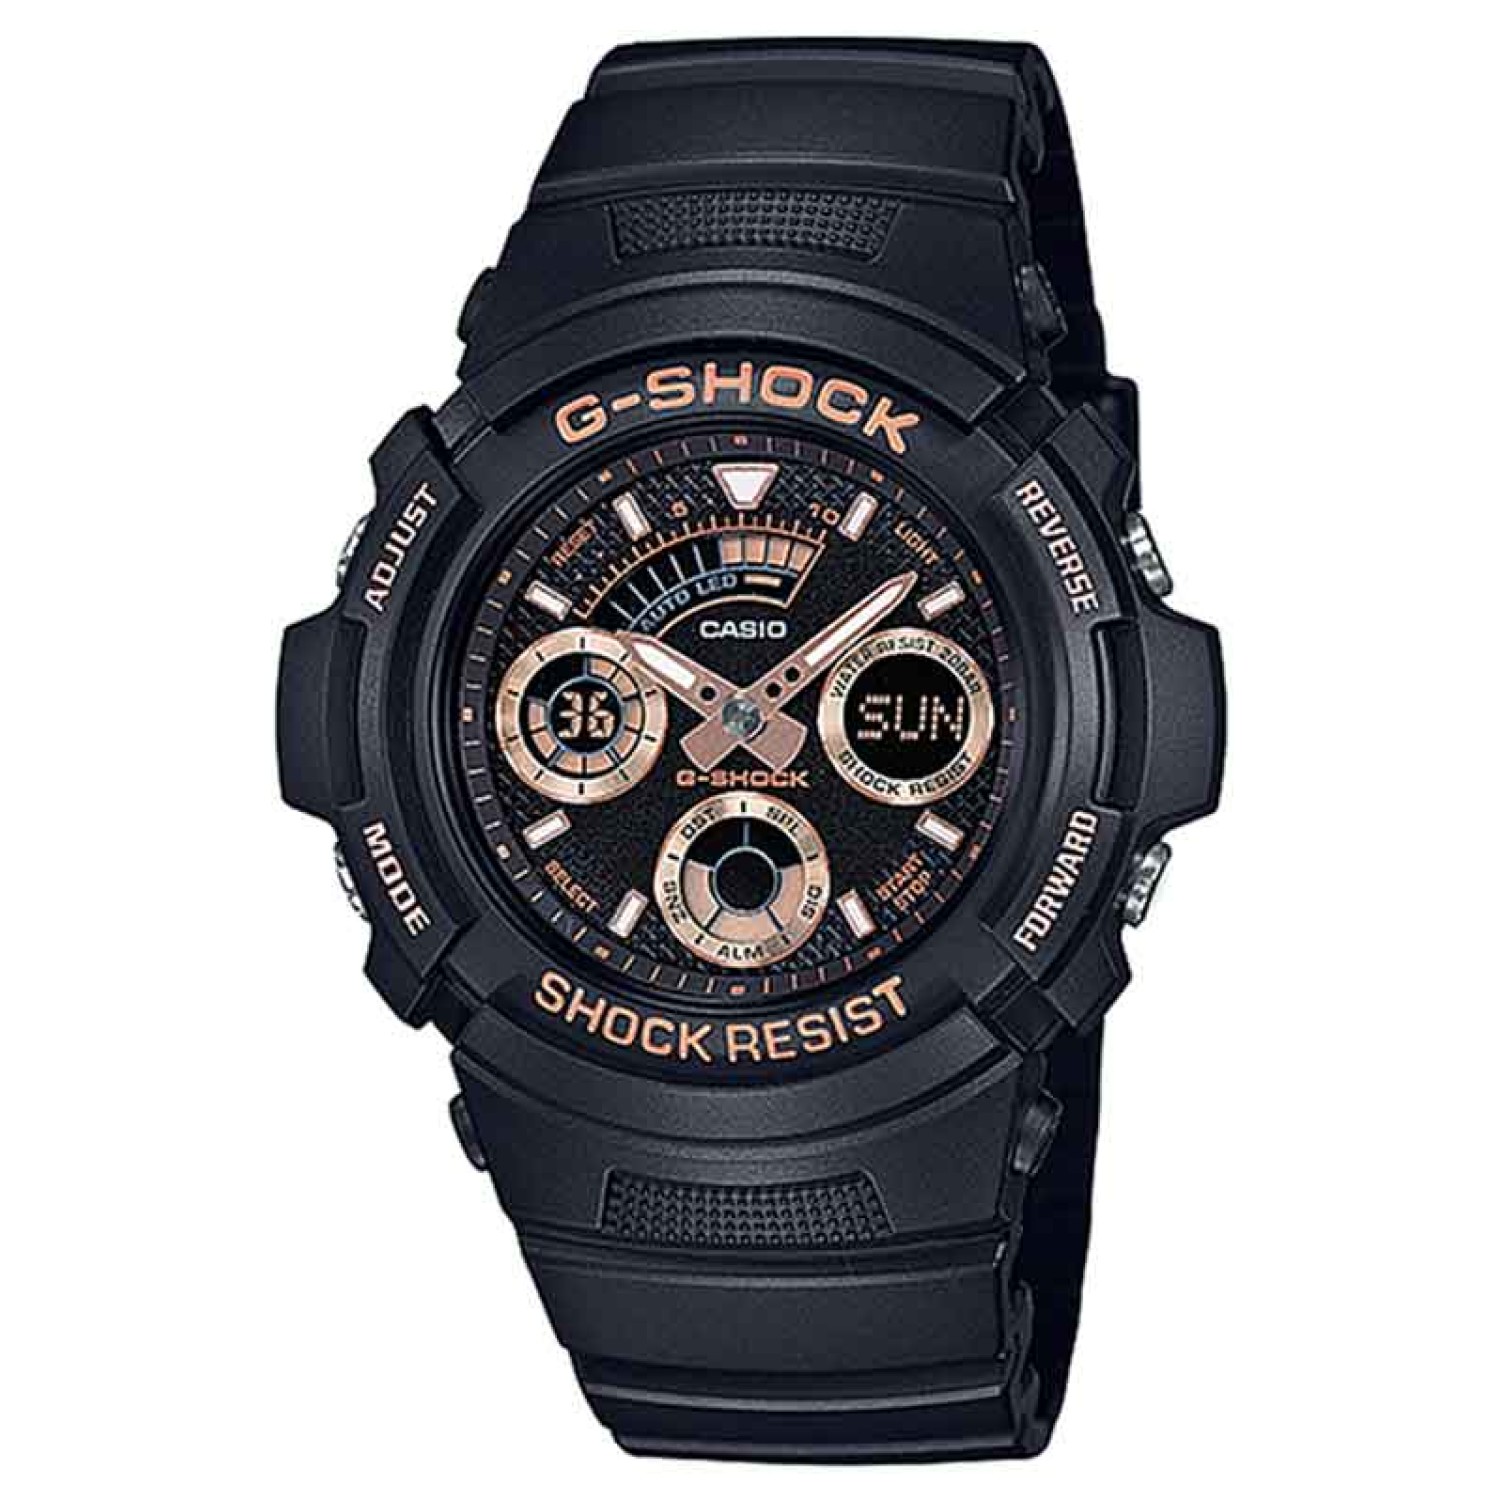 AW591GBX-1A4 G-Shock Black and Rose Collection. From G-SHOCK, the watch brand that is constantly setting new standards for timekeeping toughness, come new additions to the standard model lineup. The popular DW-9052, big case GA-100, and combination AW-591